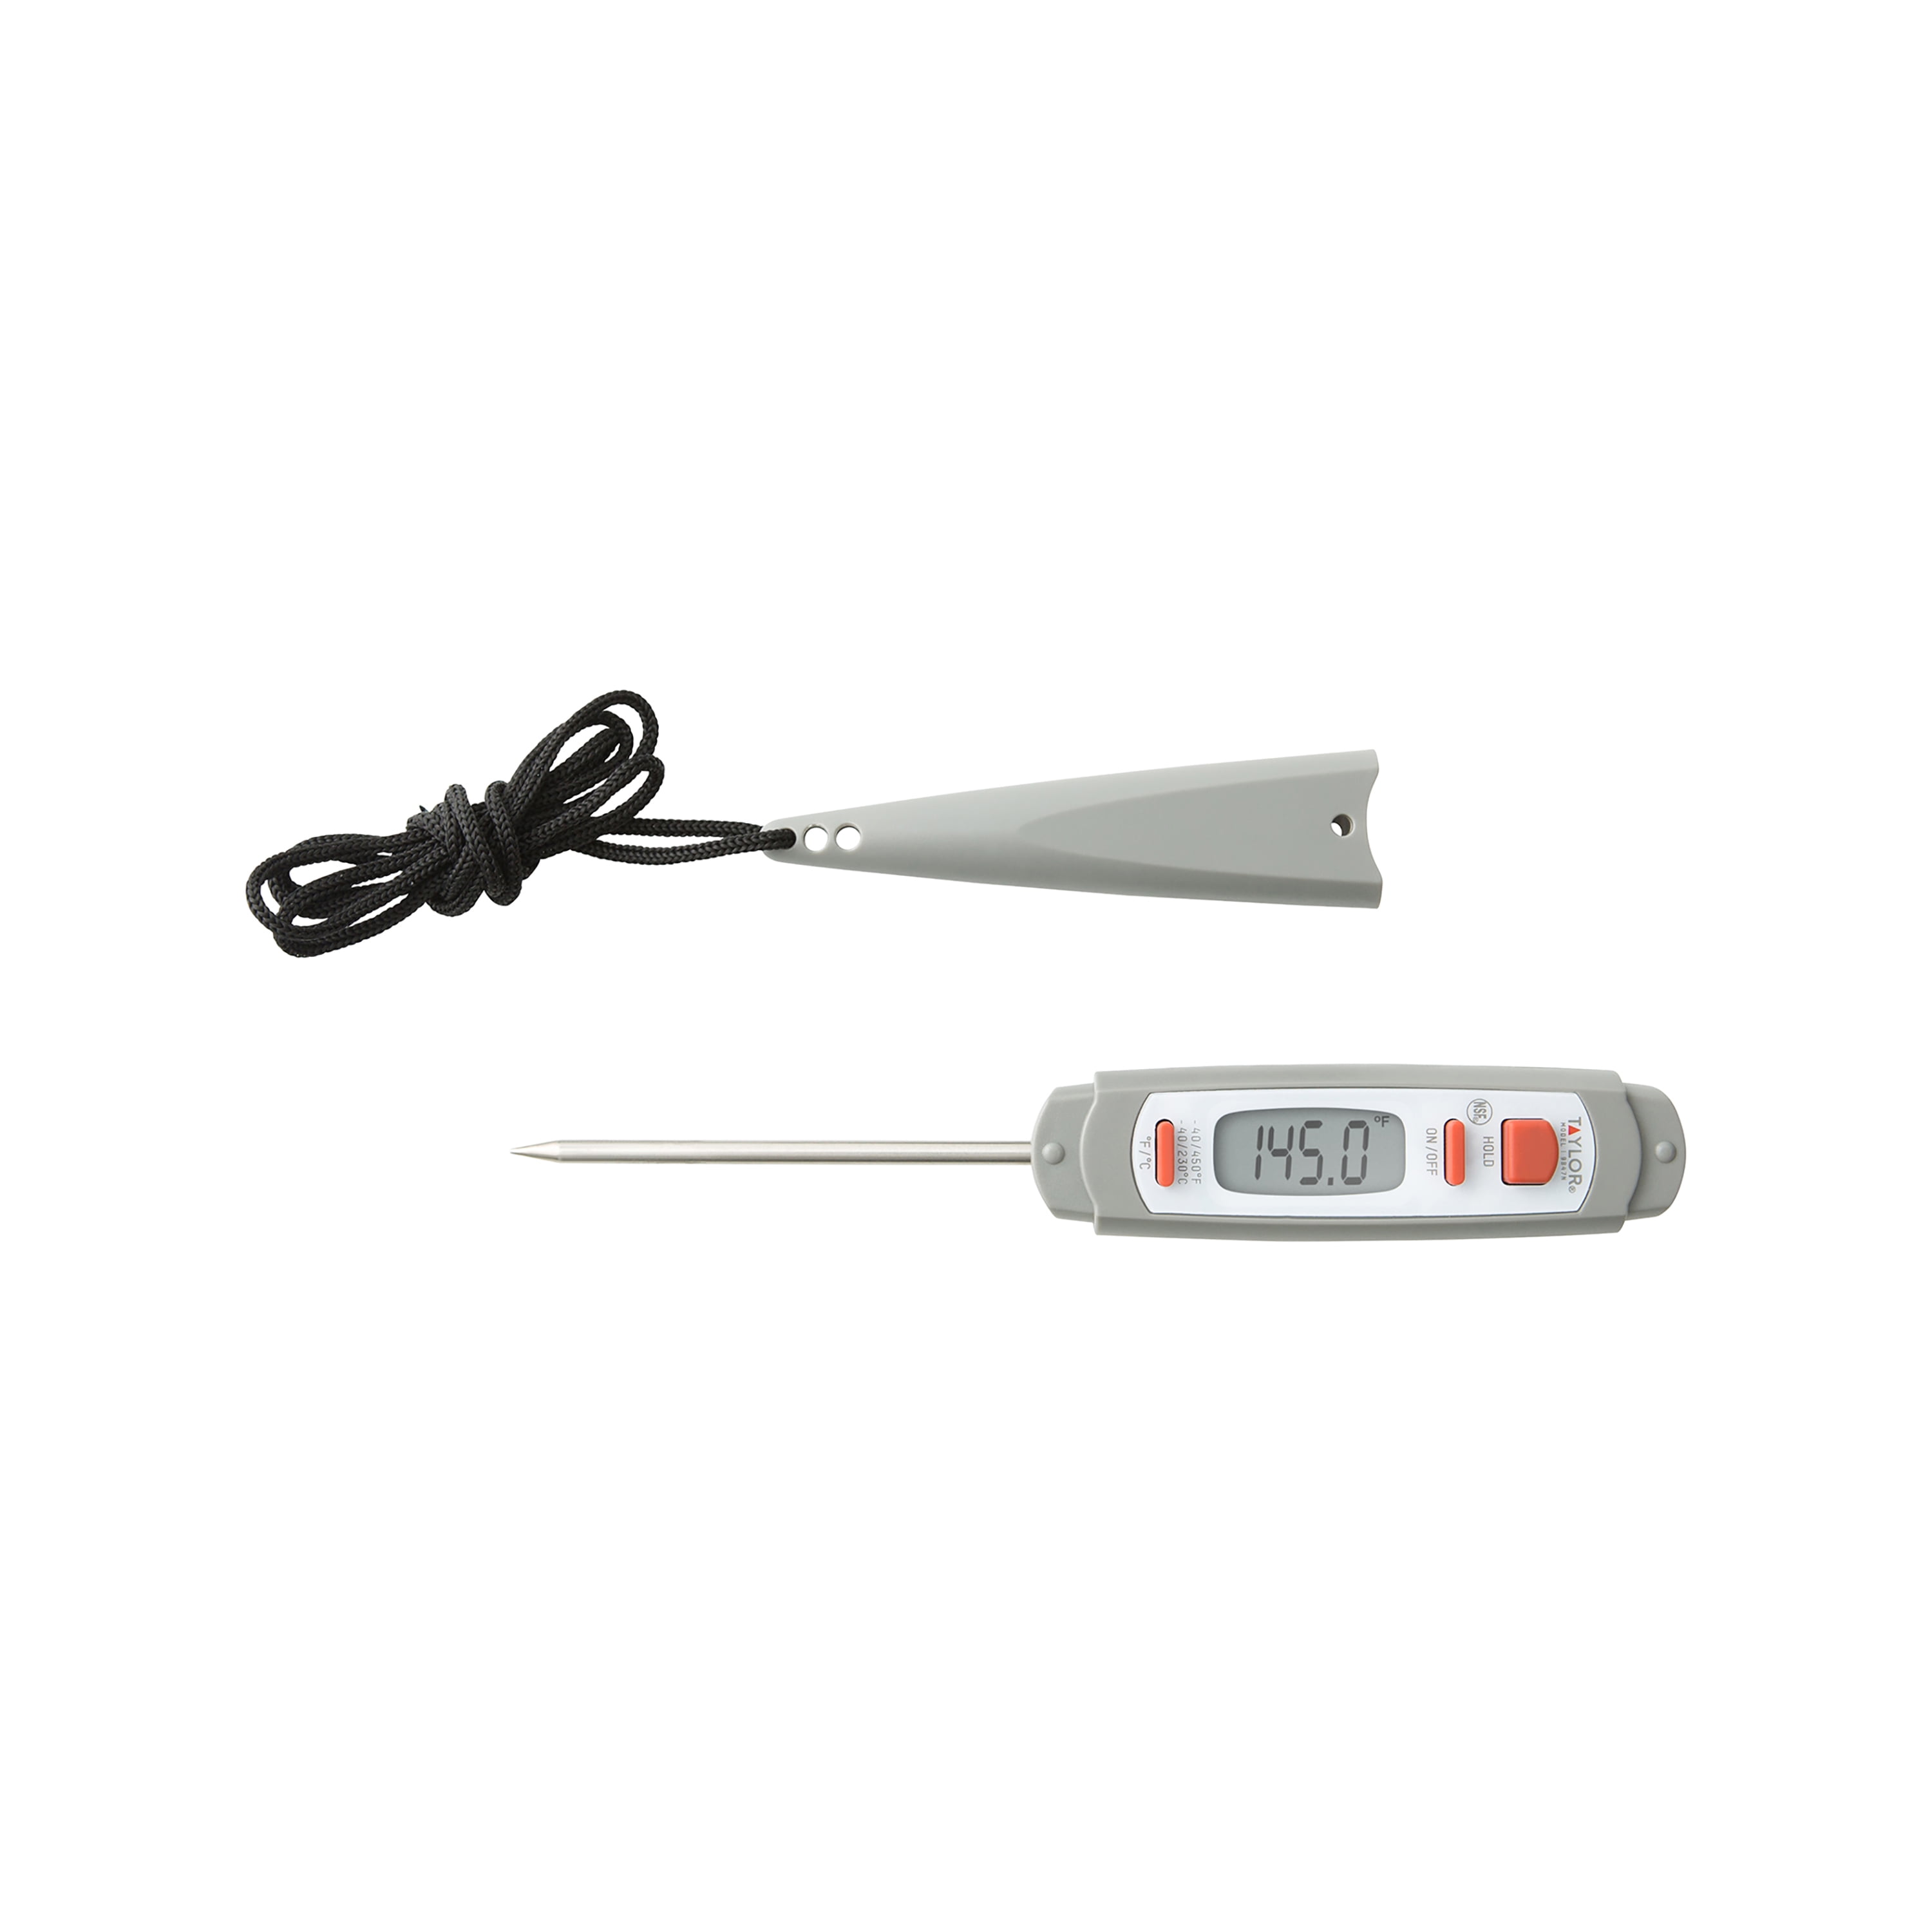 YHDSN Portable Cooking and Candy Spatula Digital Thermometer for Chocolate  Jams Caramel Yogurt Creams Syrup Sauce Food Baking BBQ, Instant Temperature